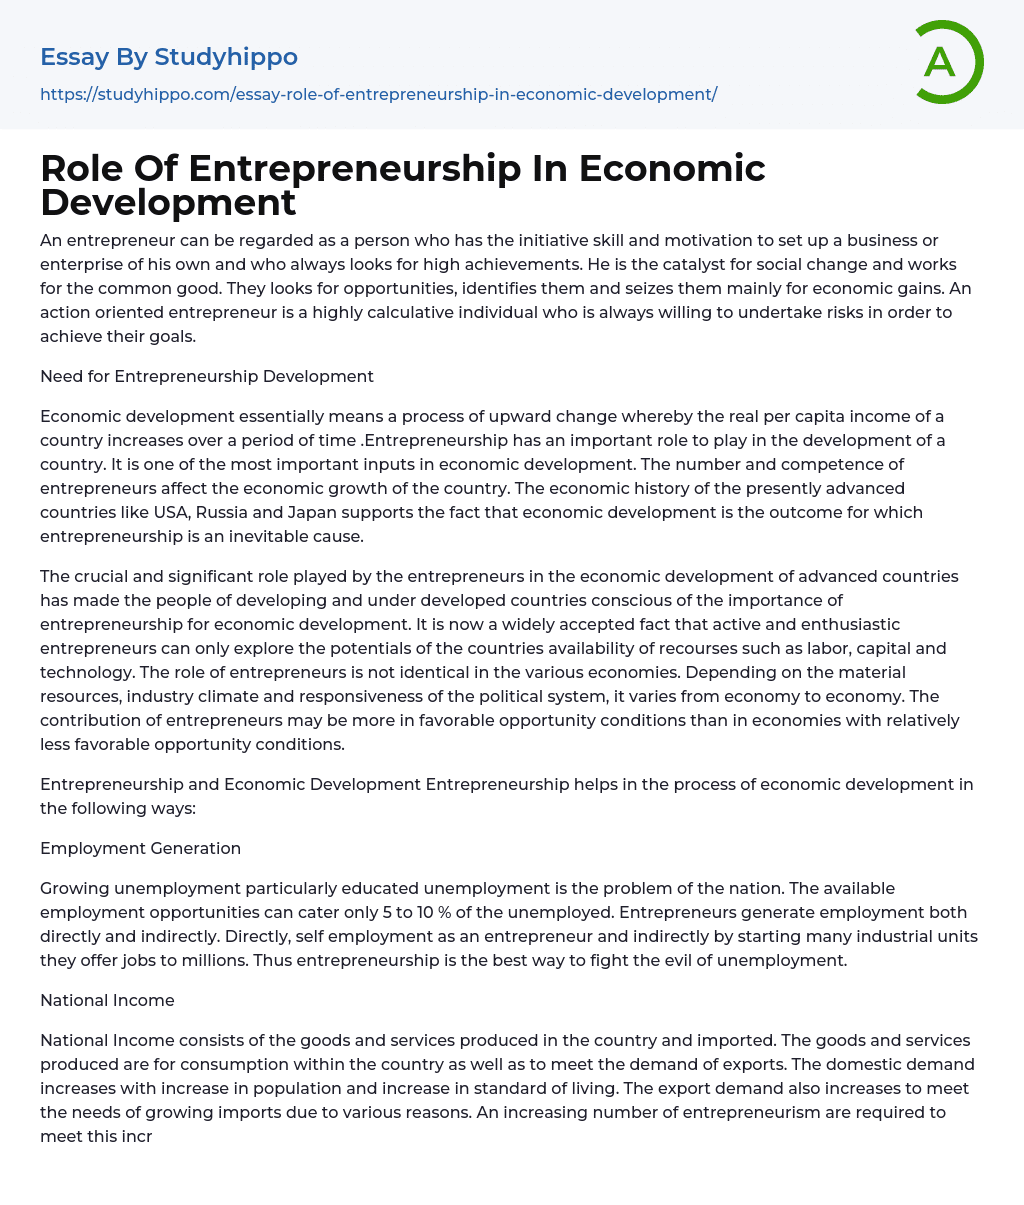 essay about innovative entrepreneurship as business opportunity for young entrepreneurs